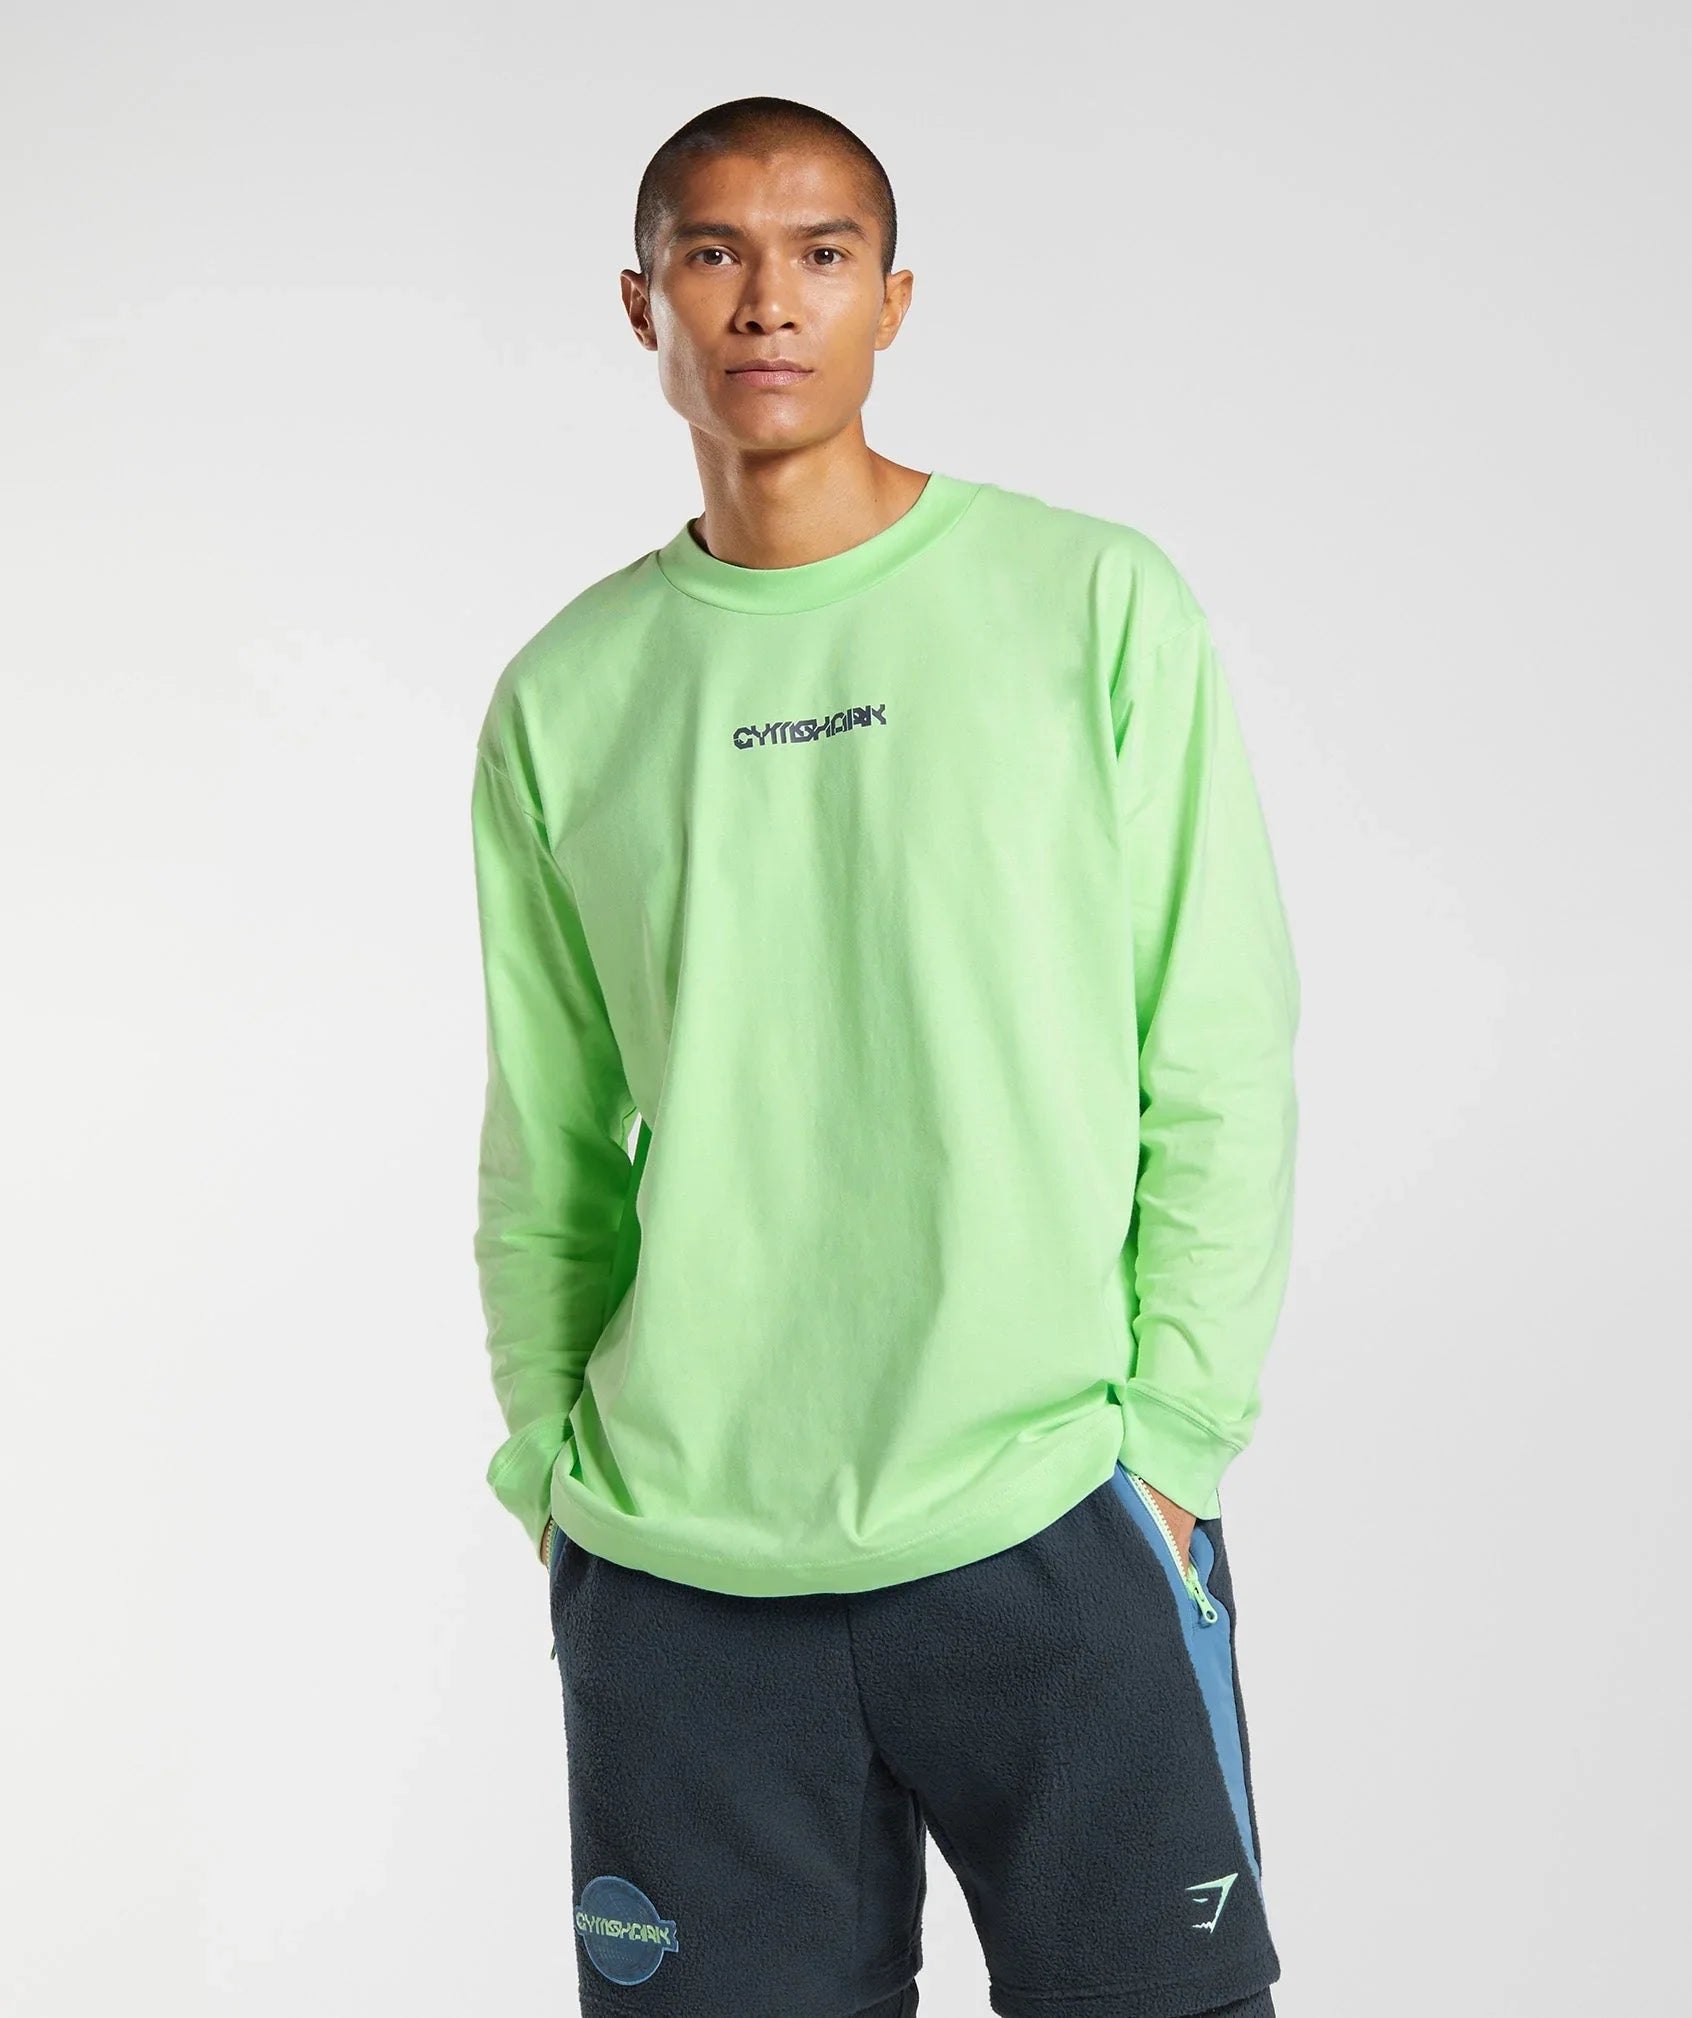 Vibes Long Sleeve T-Shirt in Bright Mint